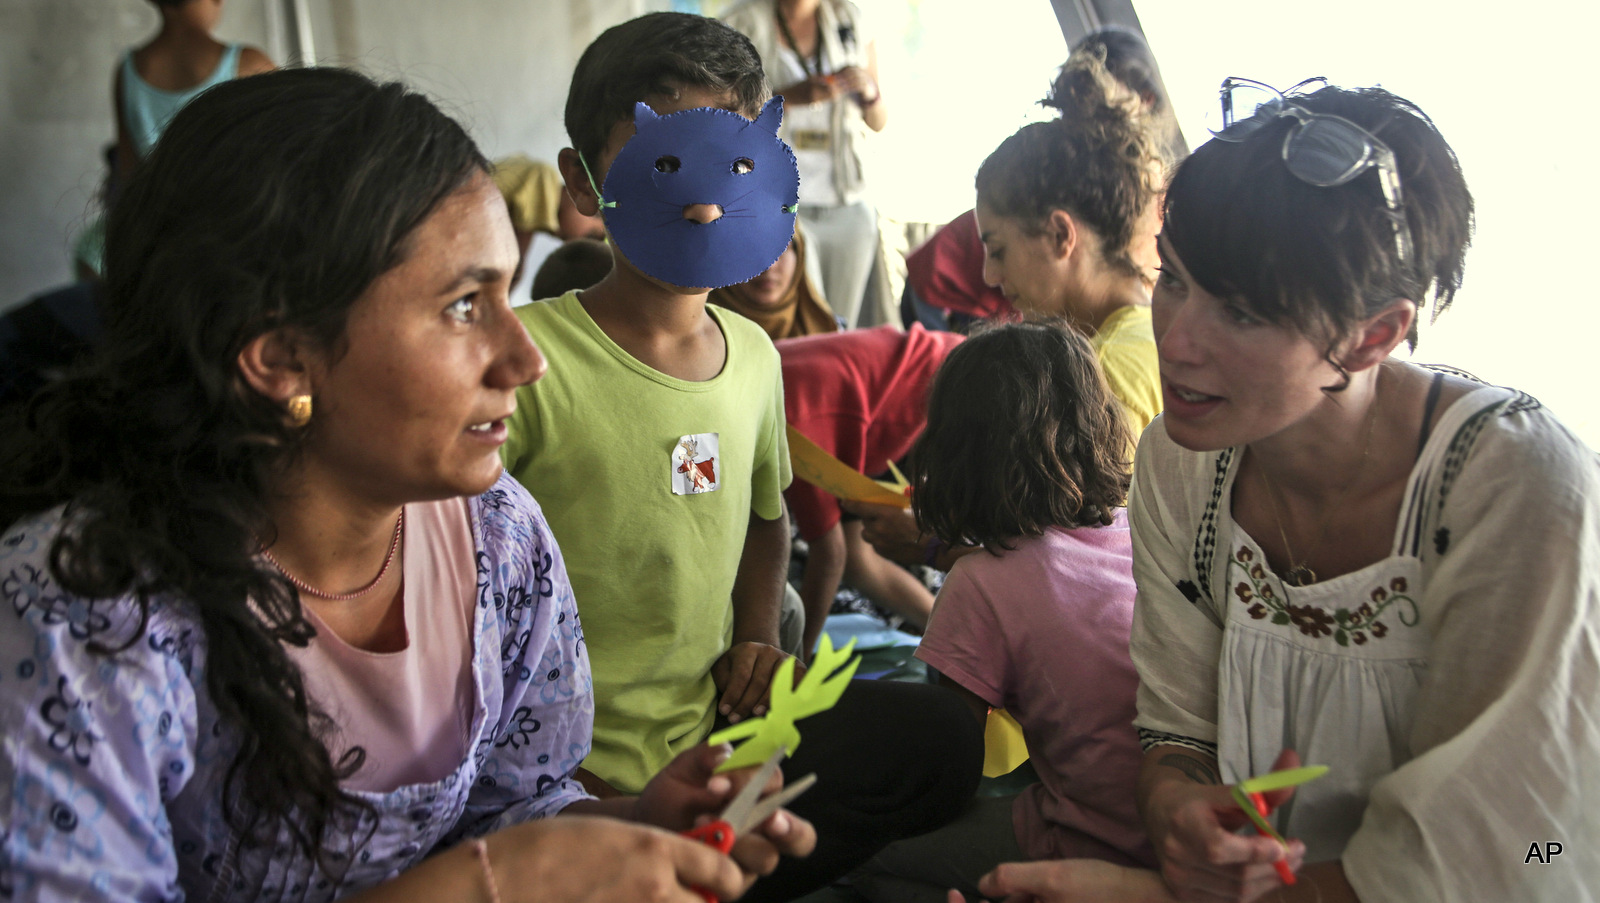 In this Thursday, June 30, 2016 handout photo provided by the International Rescue Committee, Lena Headey, right, talks with young Syrian children at Cherso refugee camp in northern Greece. Game of Thrones star Lena Headey traveled to Greece with co-stars in the TV fantasy drama Liam Cunningham and Maisie Williams to visit refugee camps with the relief organization, the International Rescue Committee. 